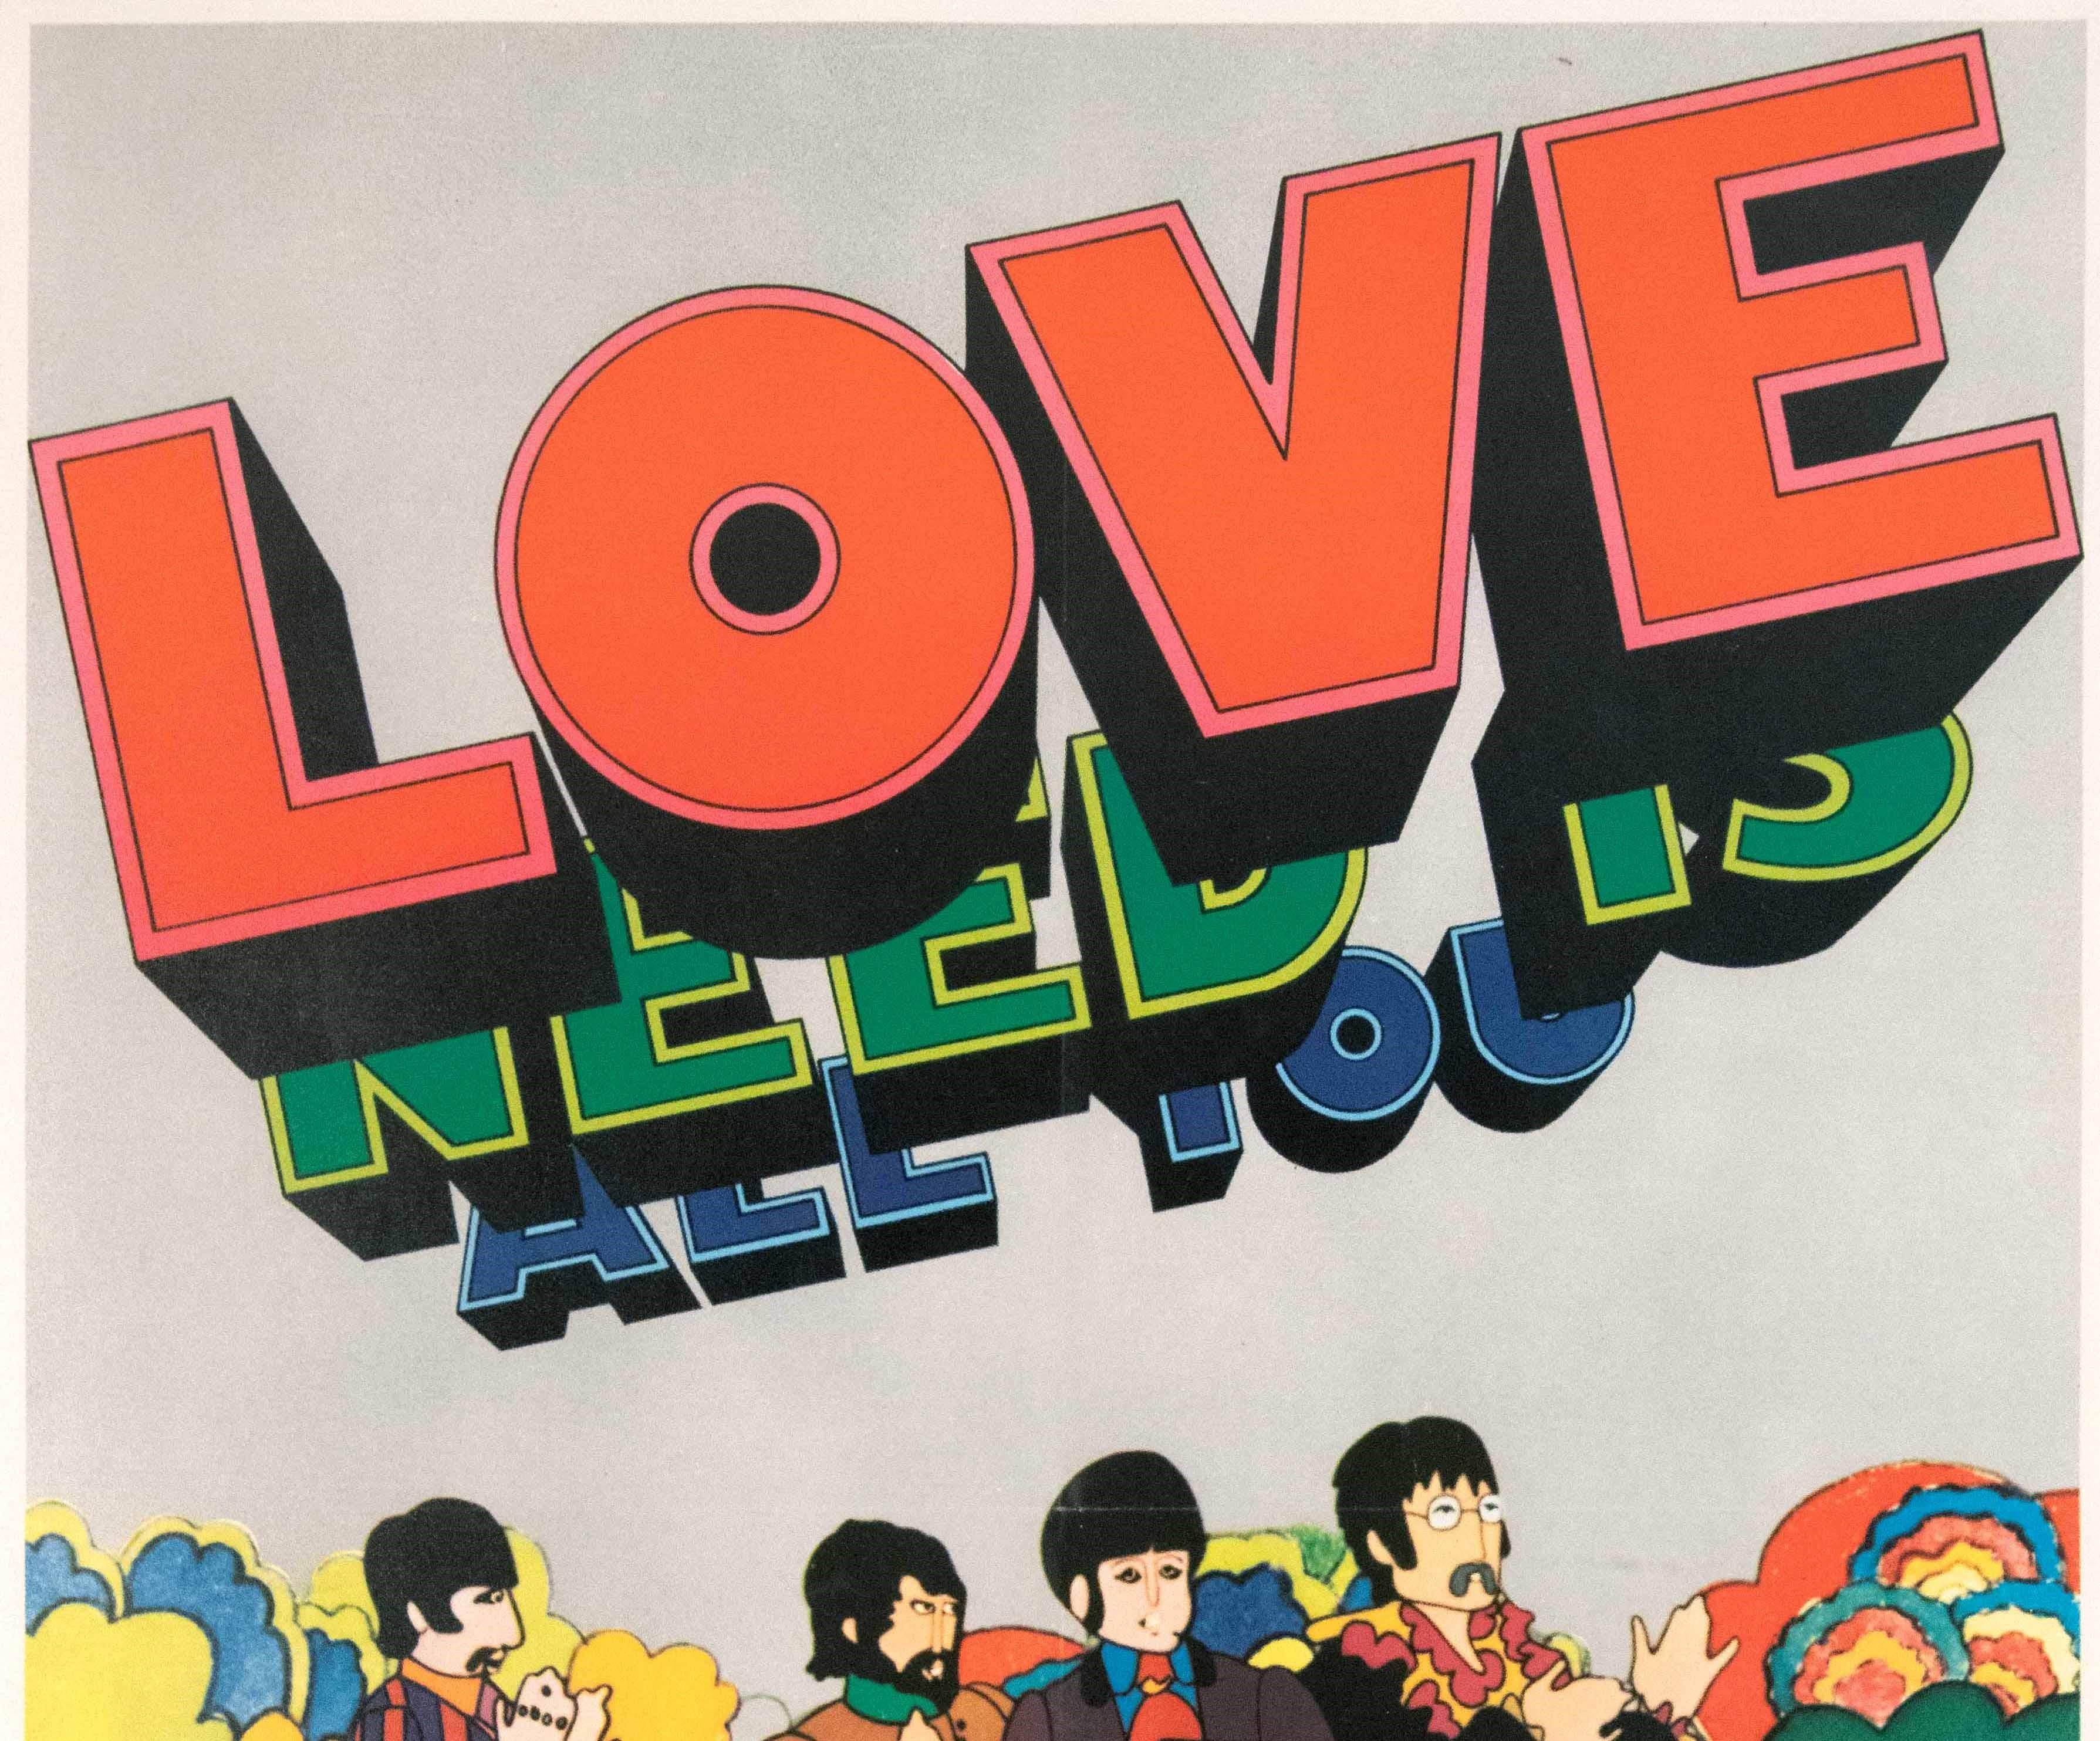 Original Vintage Poster The Beatles Yellow Submarine All You Need Is Love Shell - Print by Heinz Edelmann